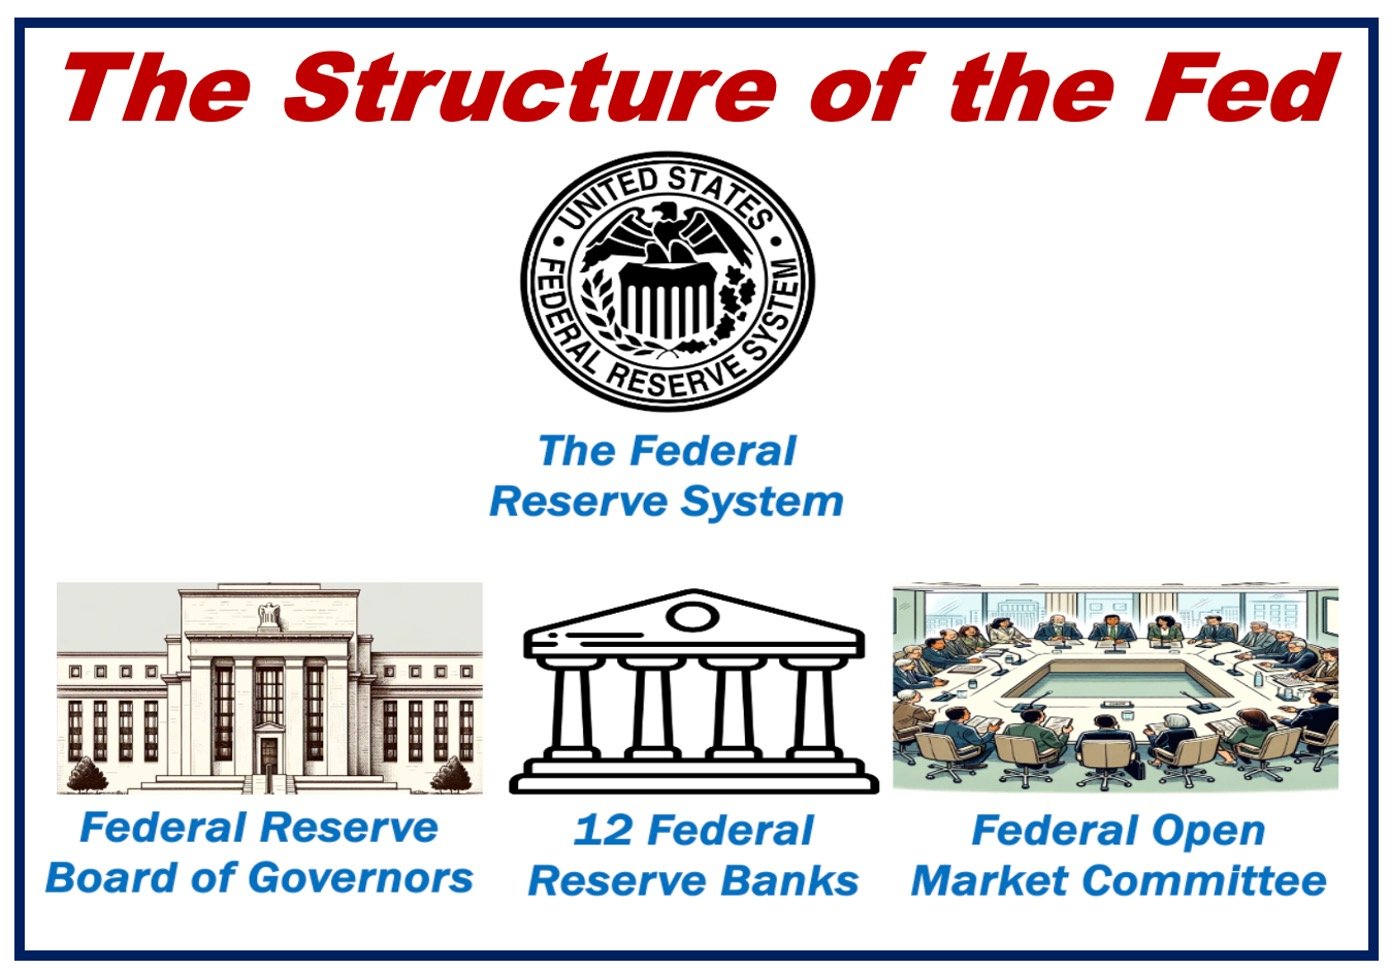 Image showing the structure of the Federal Reserve System of the US.